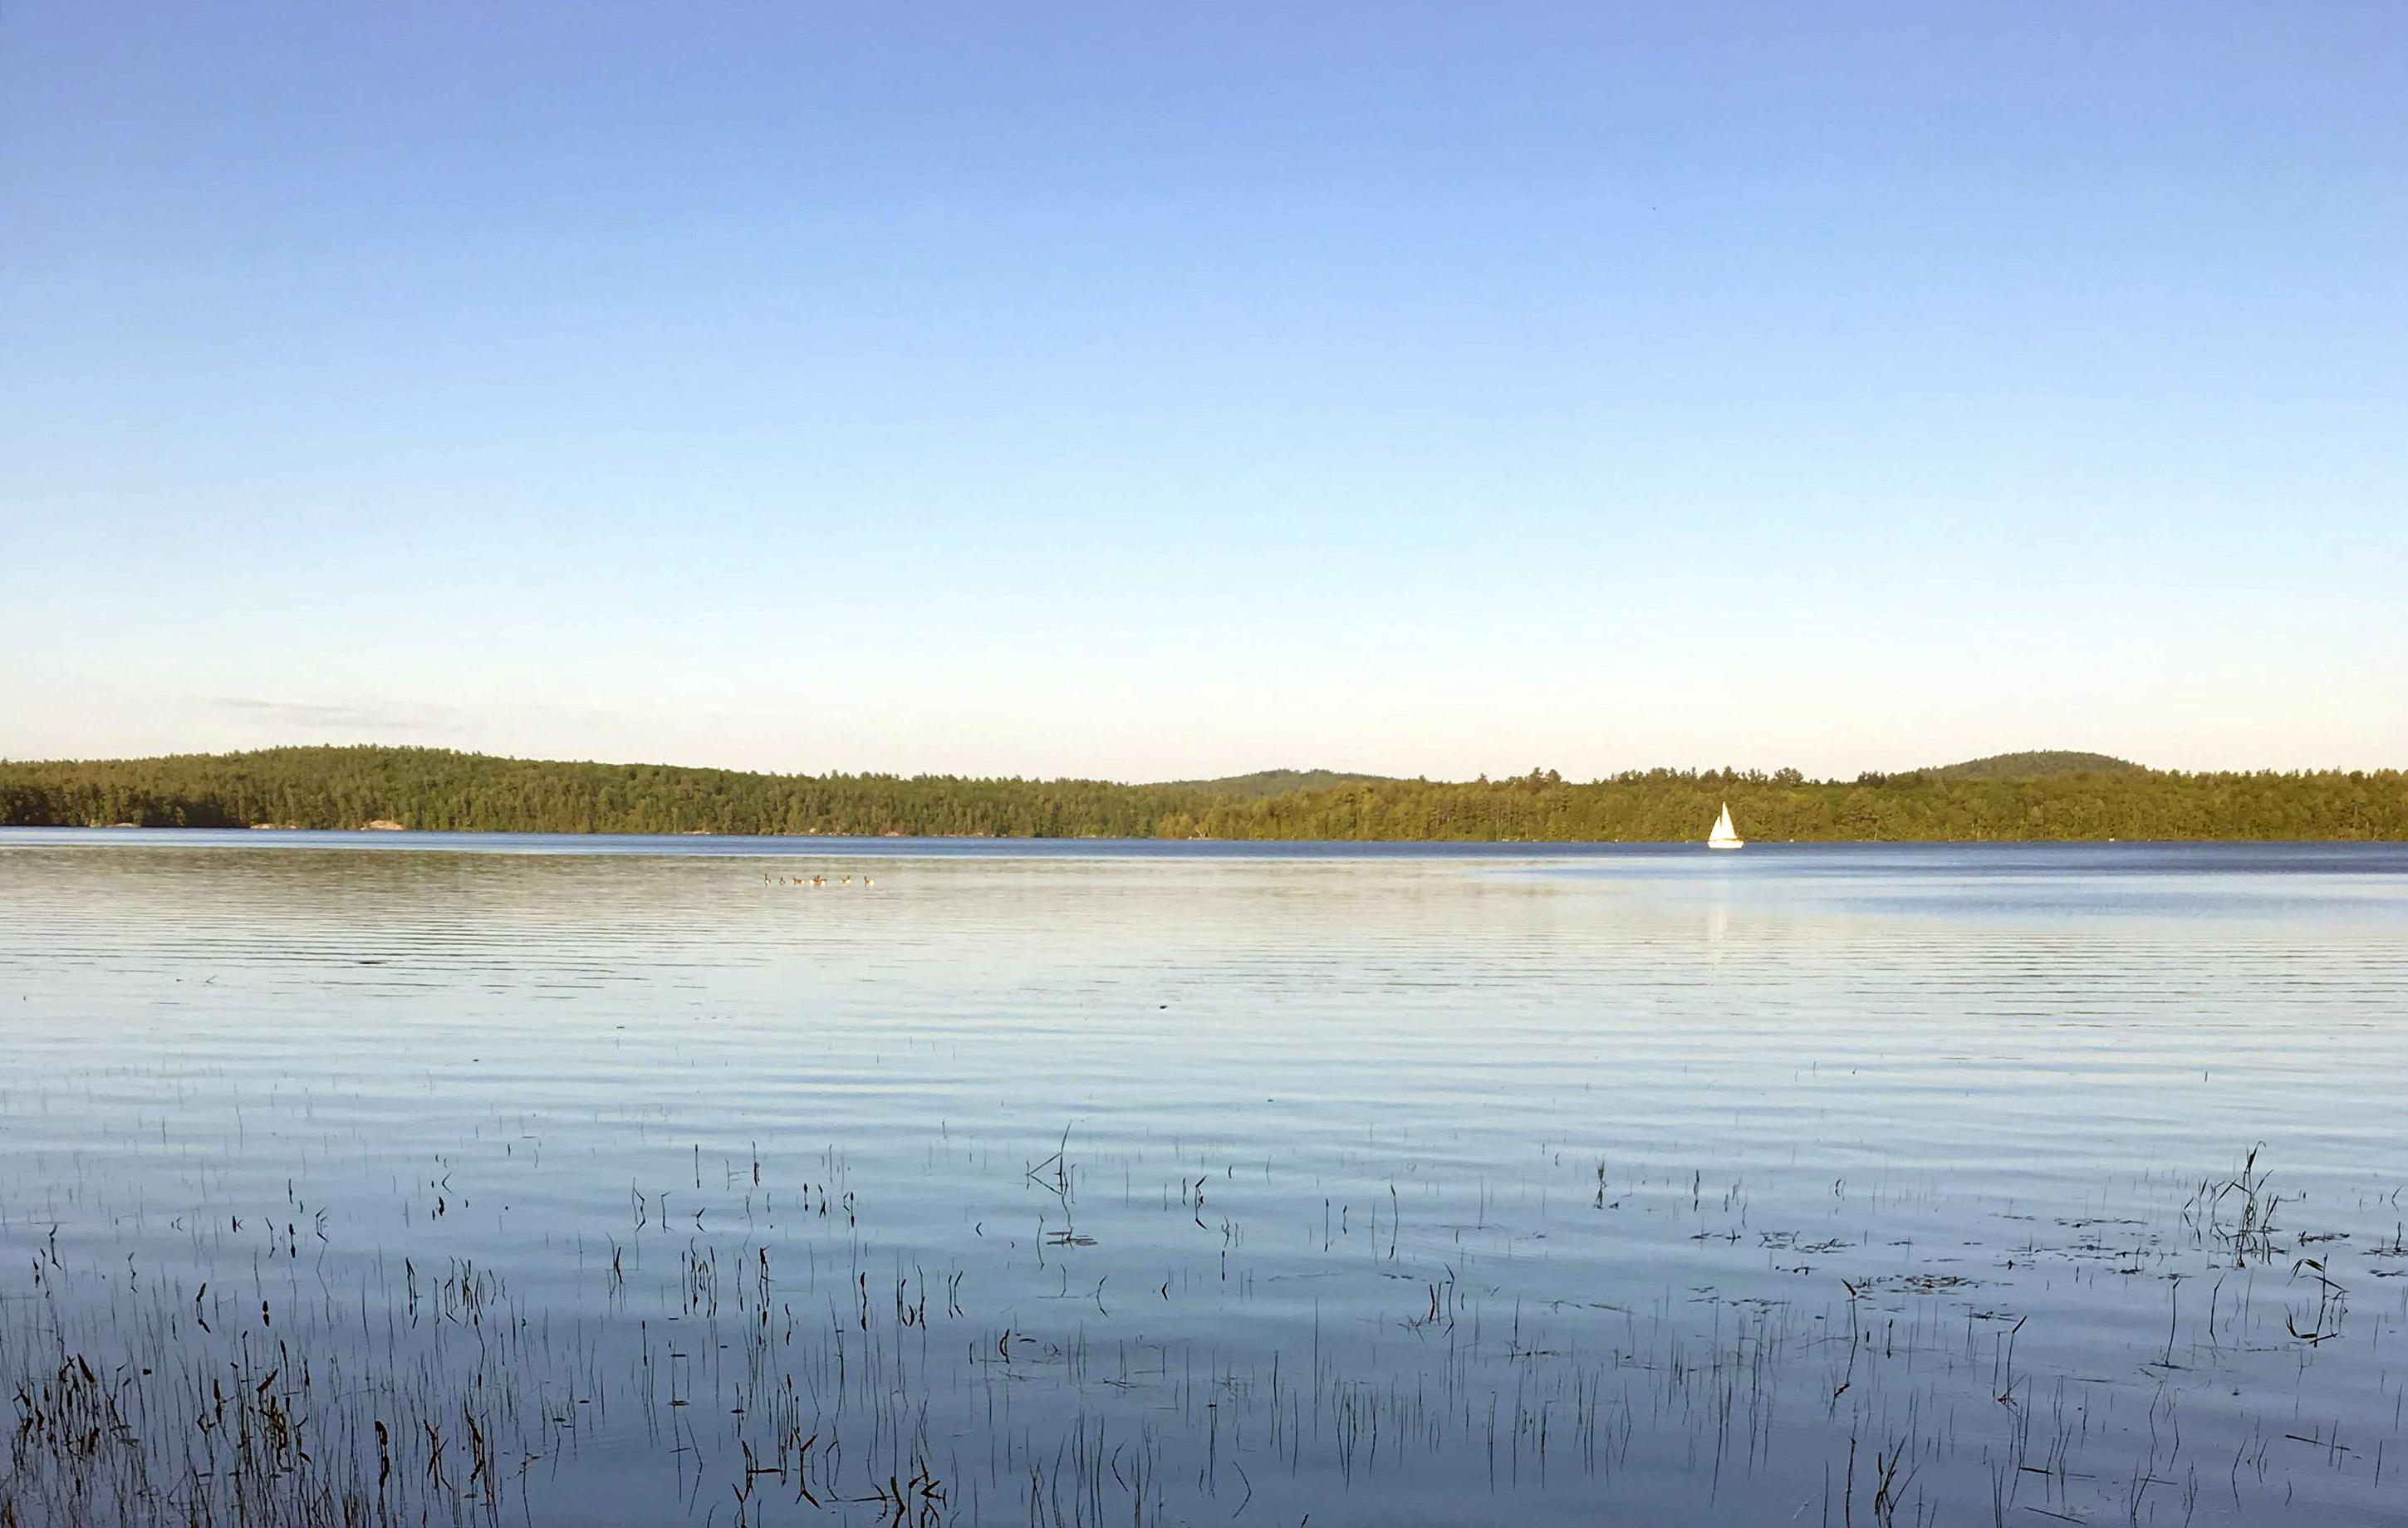 A view of a lake in summer sunshine with a sailboat on the water.